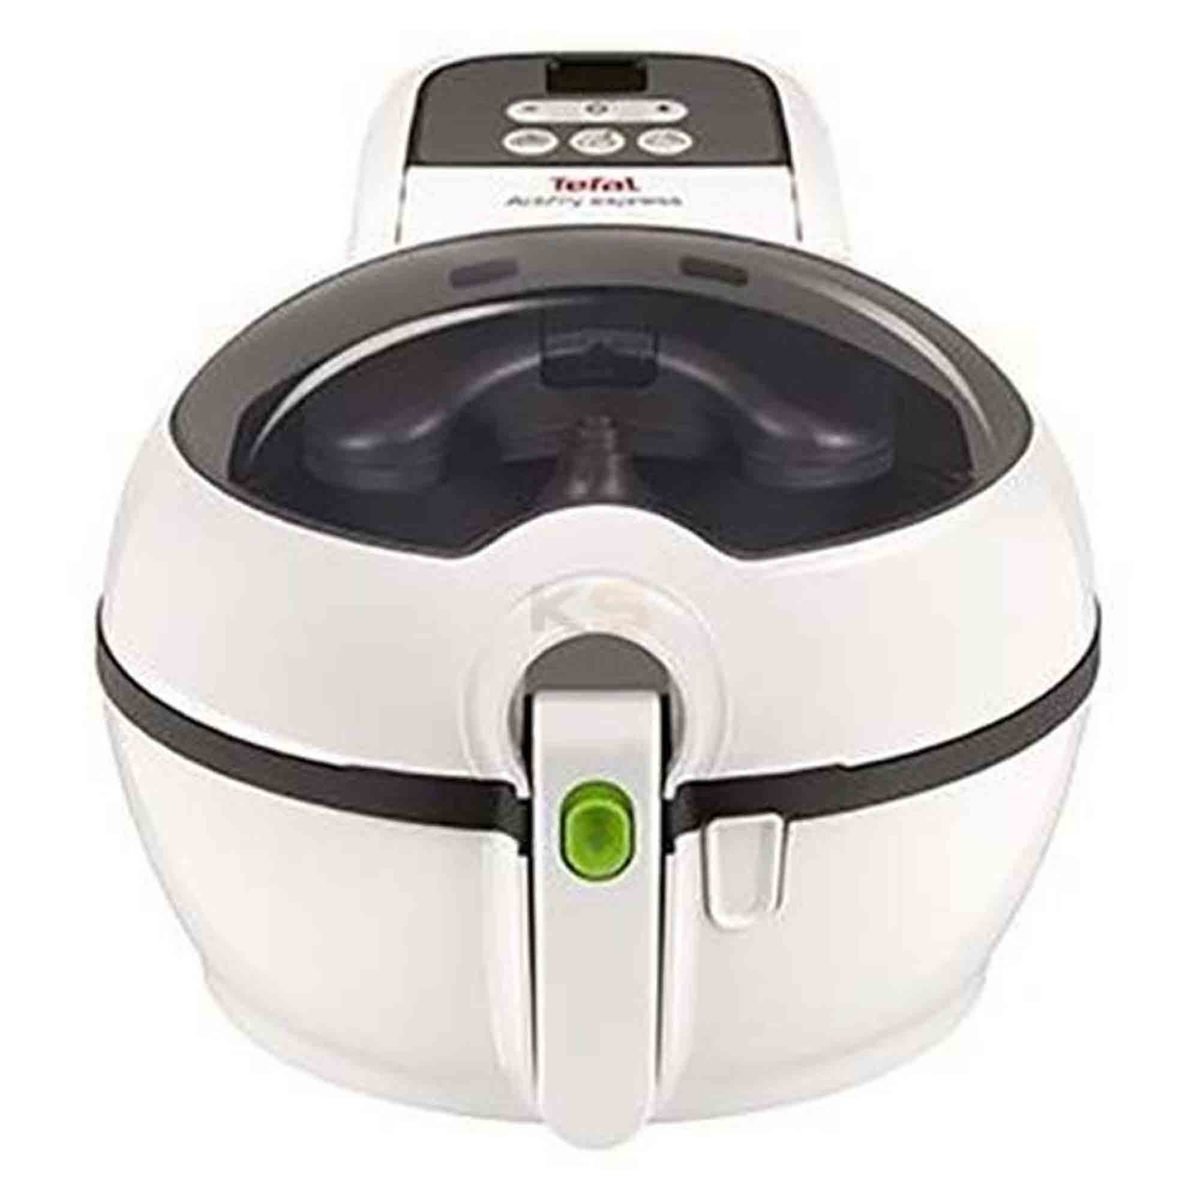 Tefal Actifry Express FZ750027 1Kg + Baking Cup